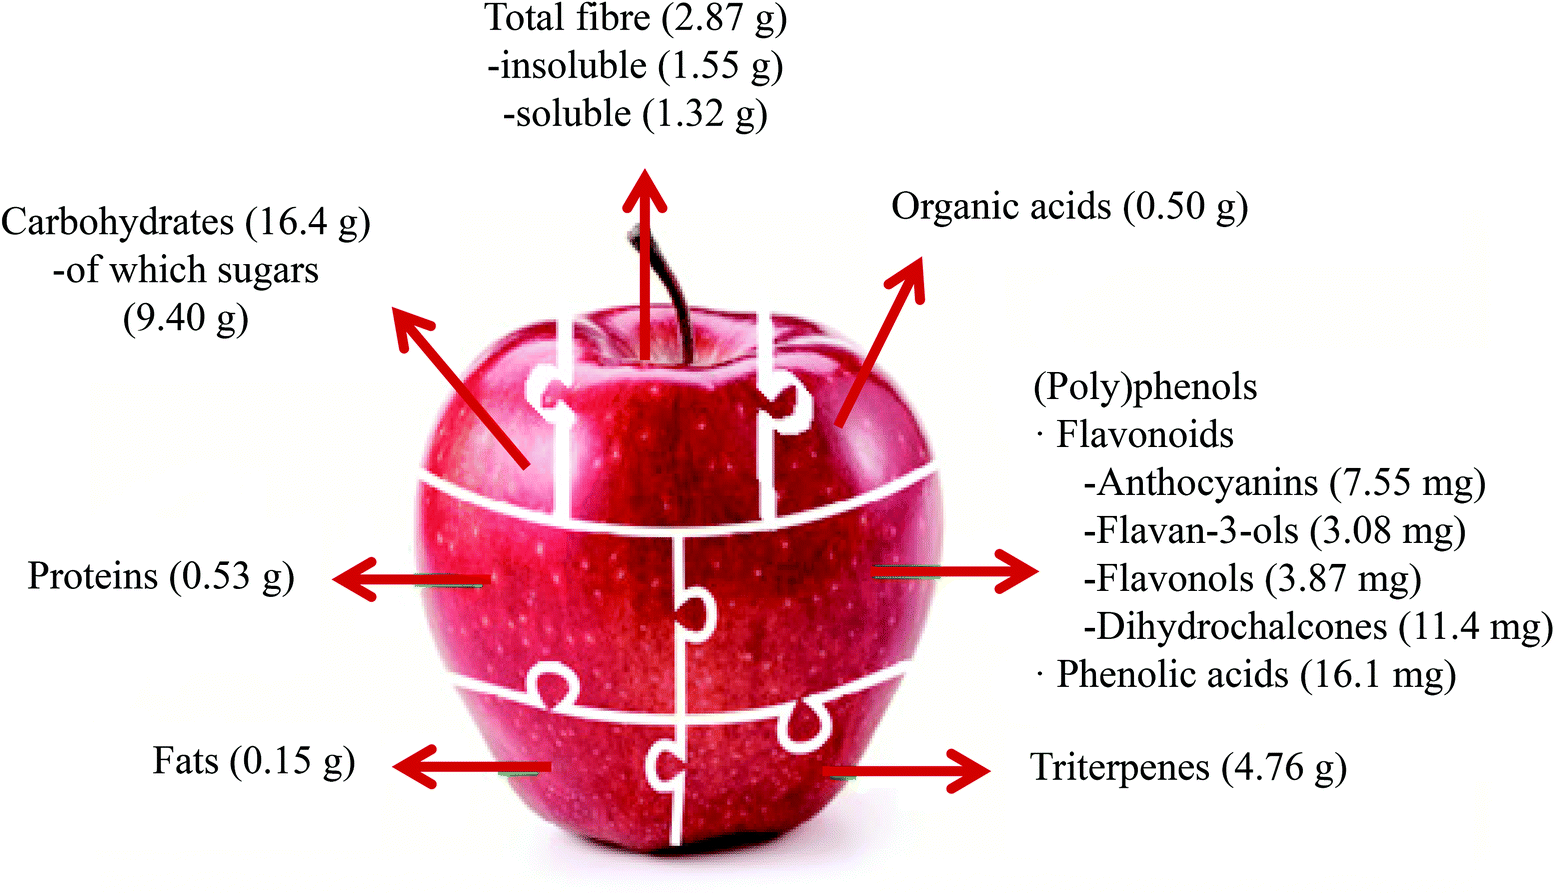 Breeding red-fleshed apples – introduction — Science Learning Hub